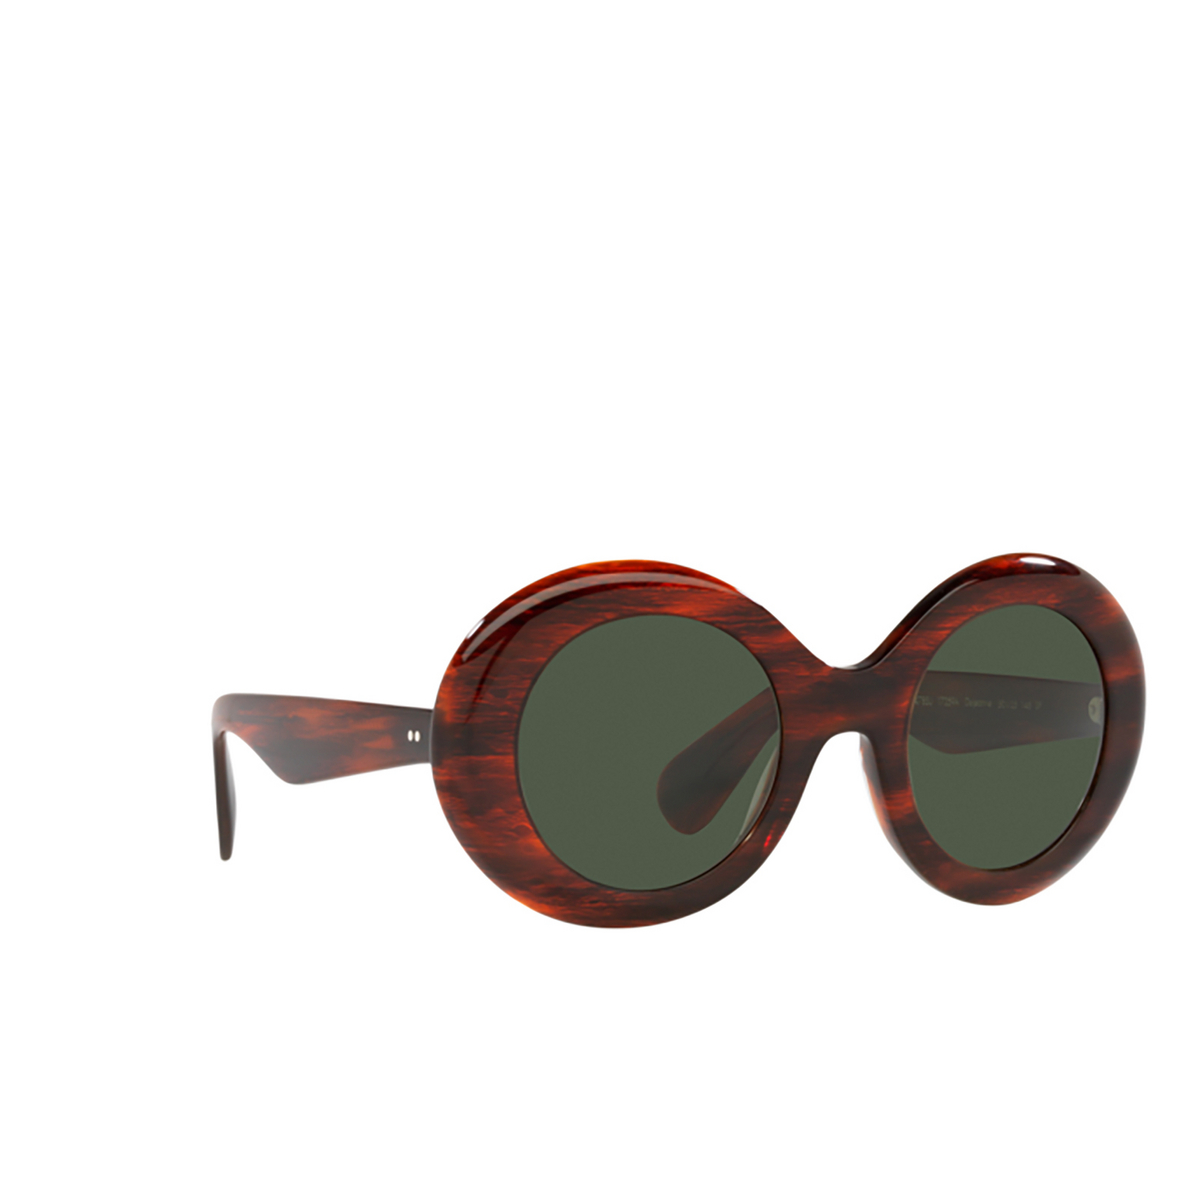 Oliver Peoples DEJEANNE Sunglasses 17259A Vintage red tortoise - three-quarters view